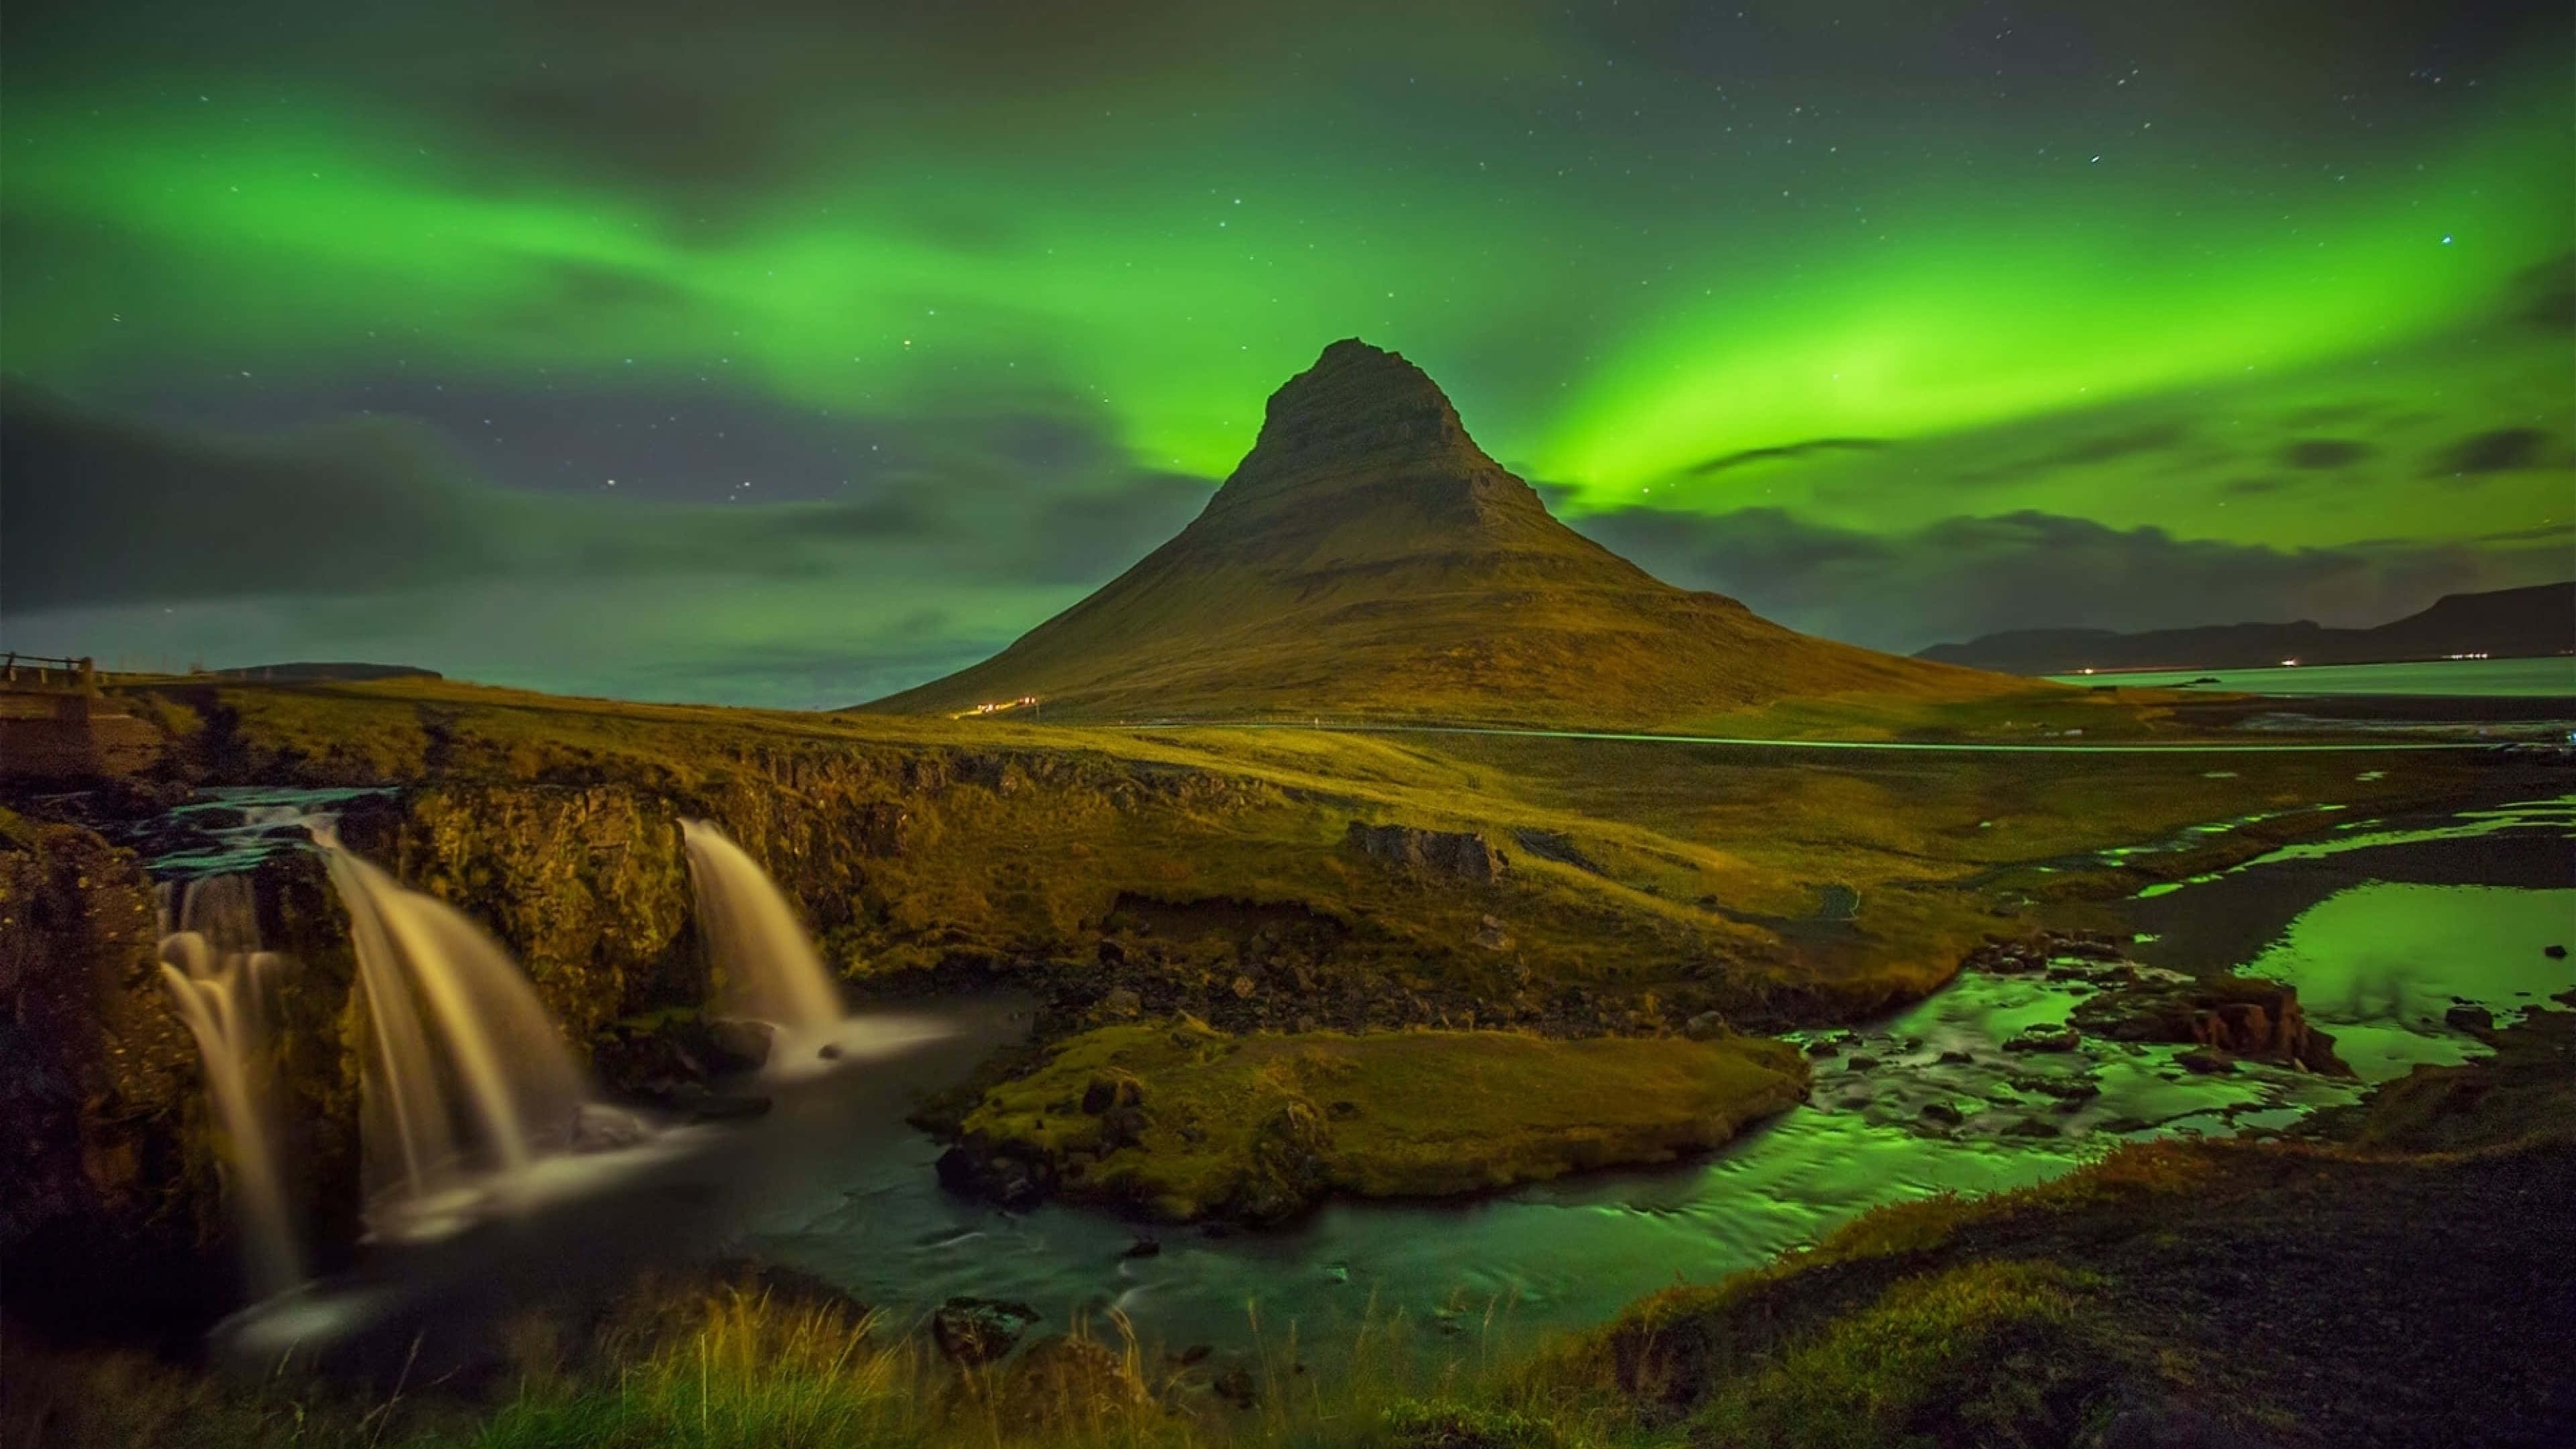 Caption: Majestic View Of Northern Lights In The Sky Wallpaper